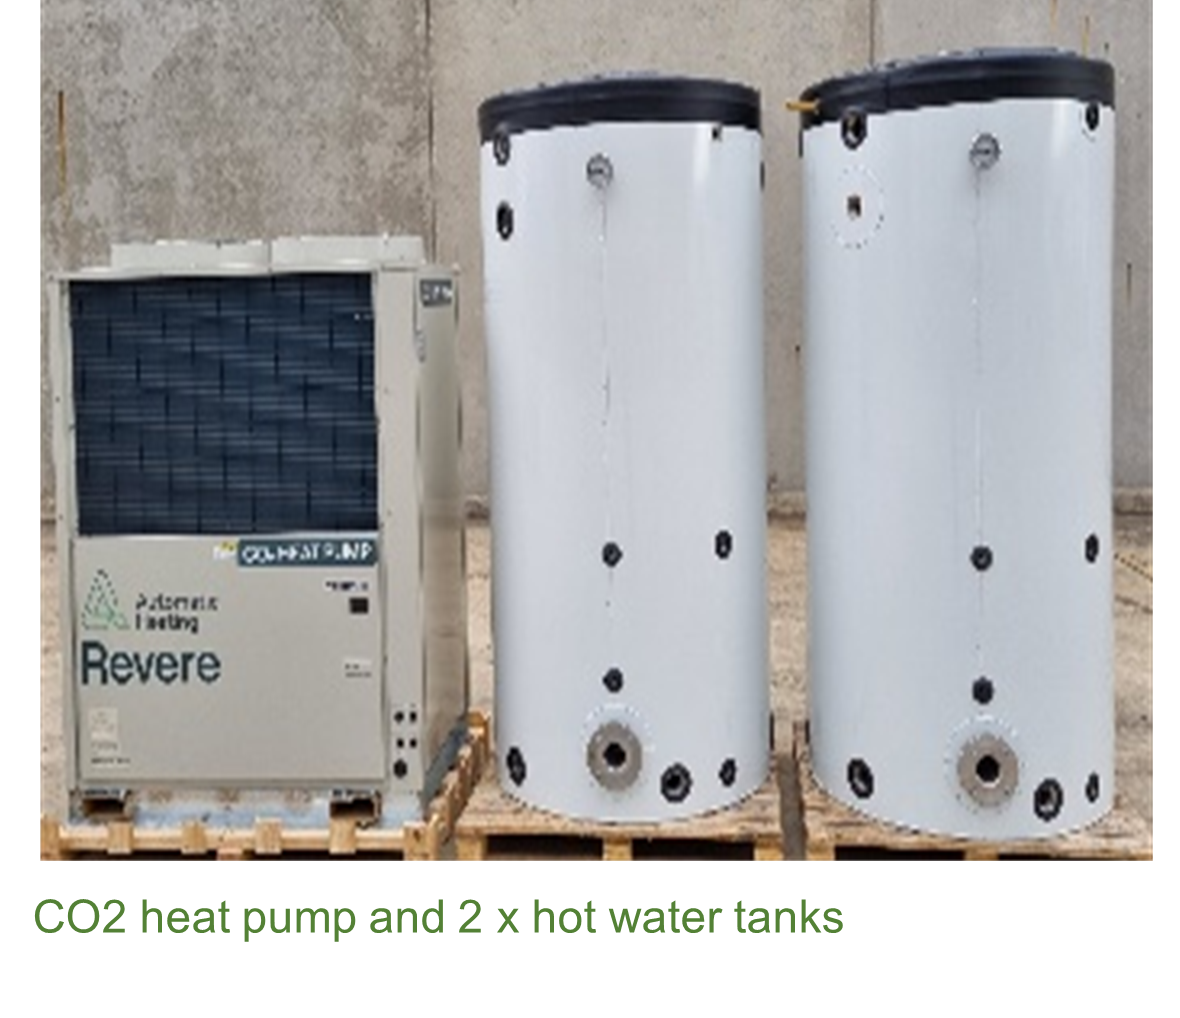 CO2 heat pump and 2 hot water tanks